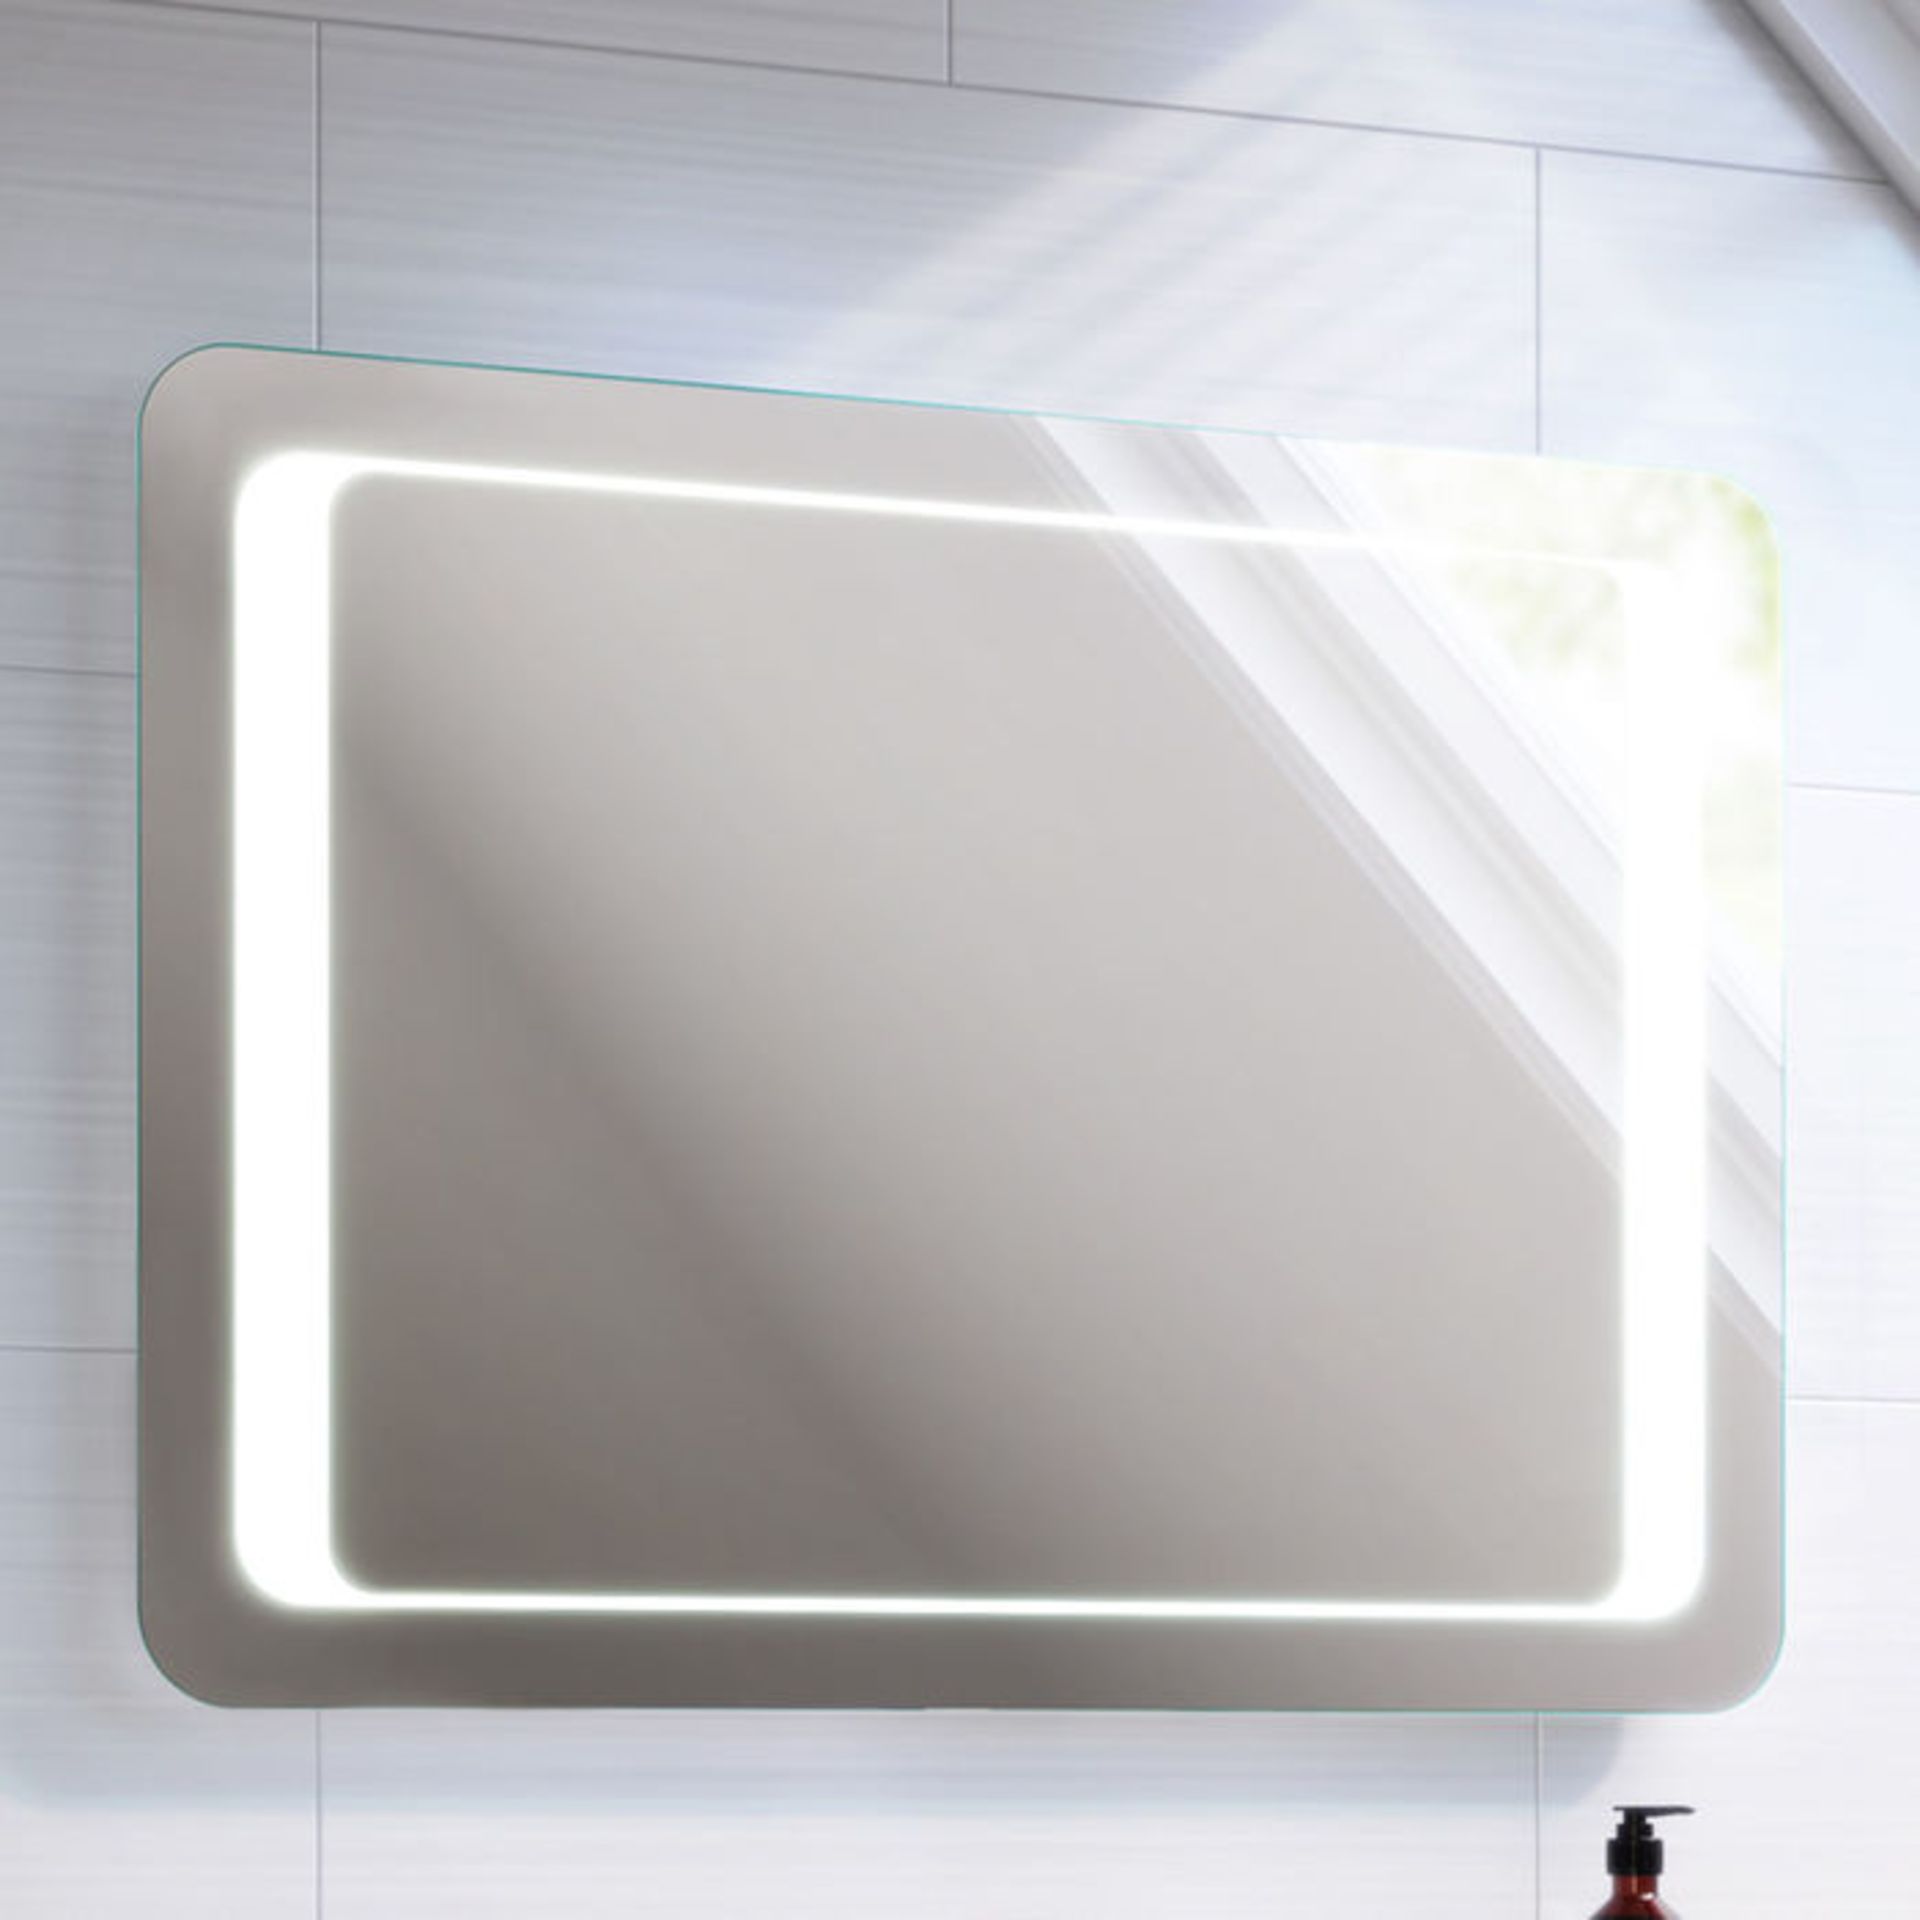 (DK22) 800x600mm Quasar Illuminated LED Mirror. RRP £349.99. Energy efficient LED lighting with IP44 - Image 3 of 7